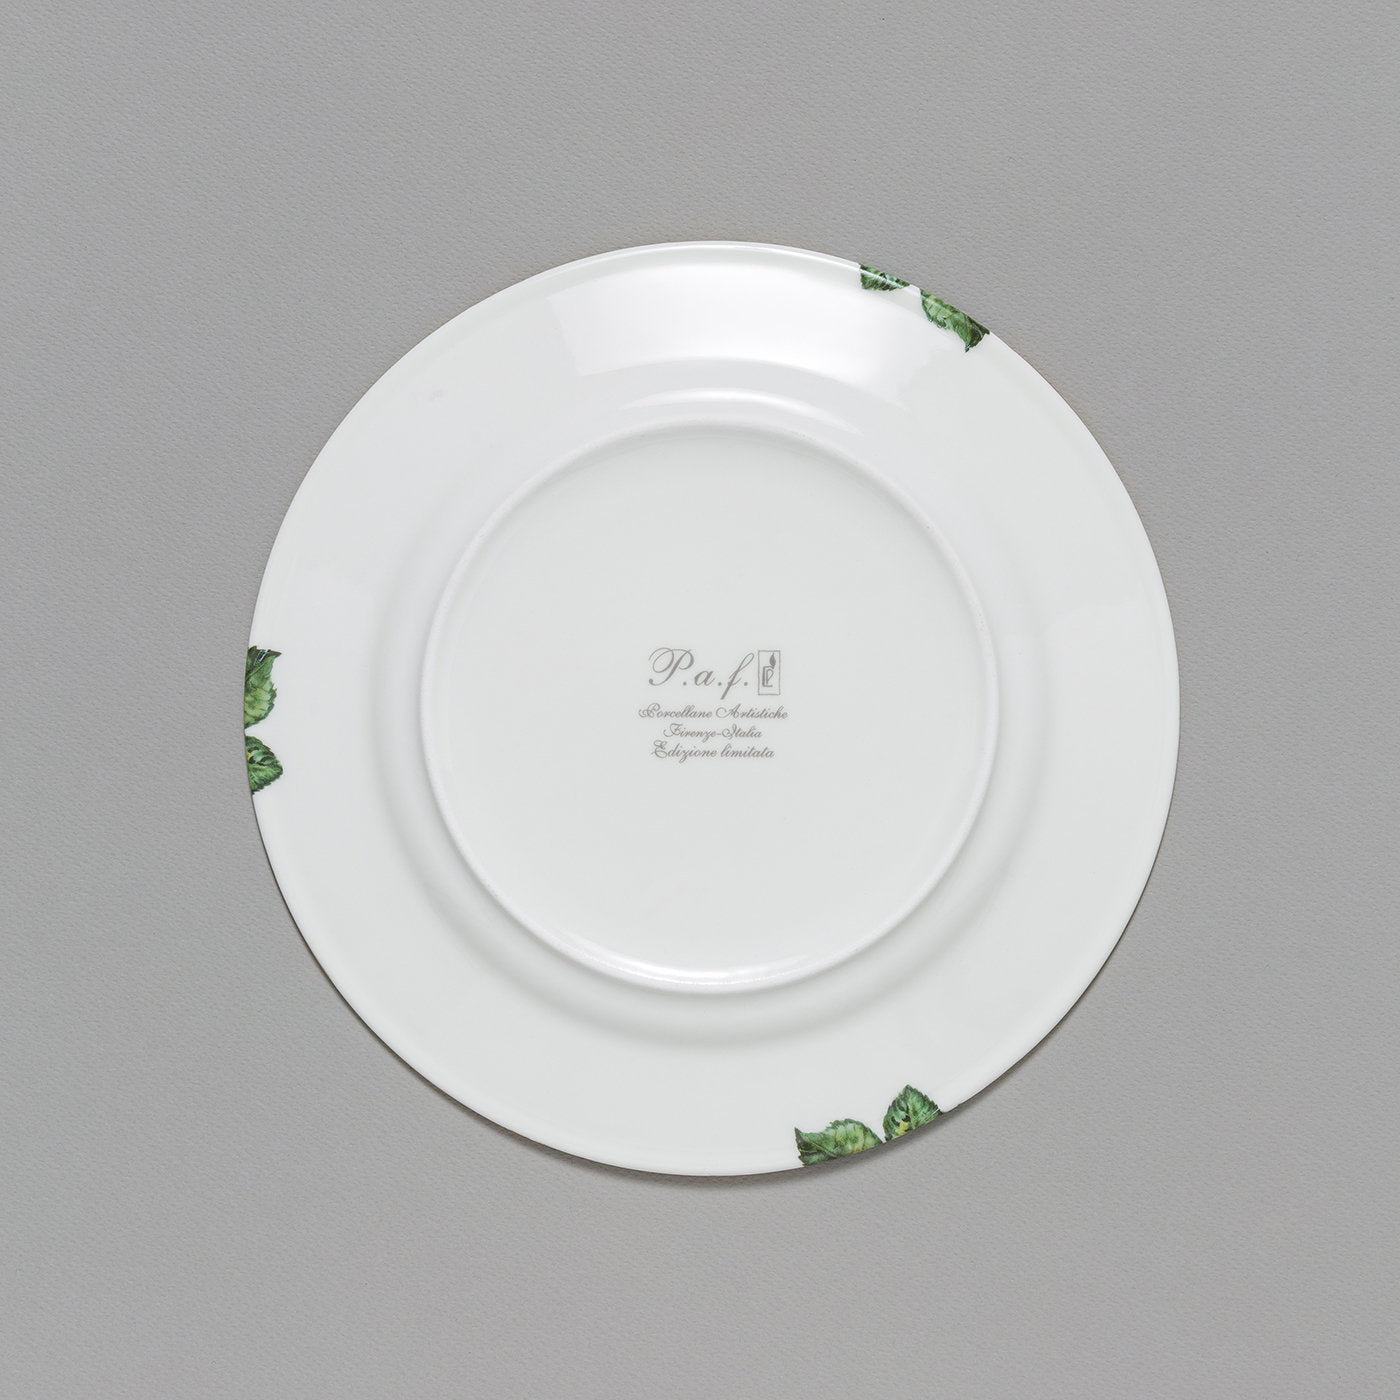 Rosa Rossa Collection Plate - Alternative view 1